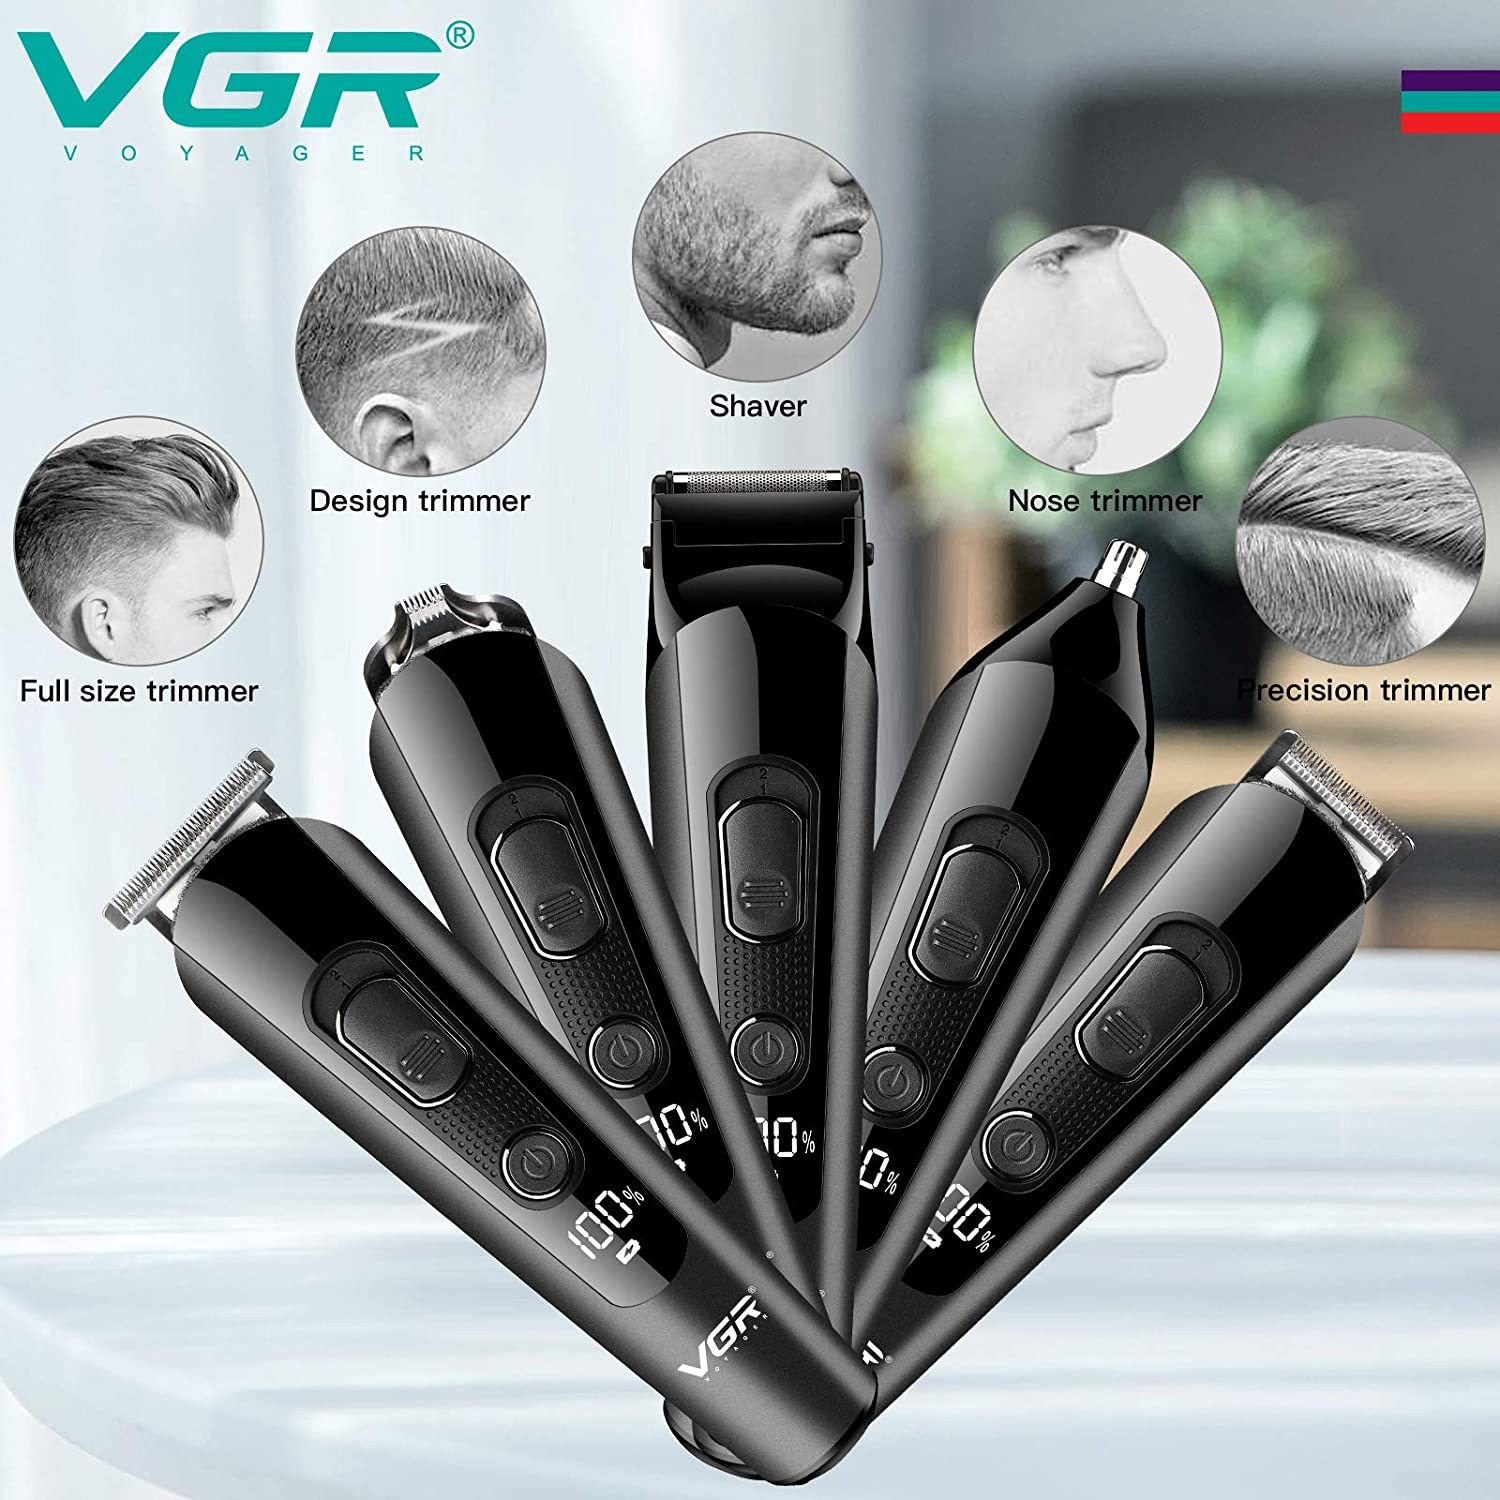 VGR V-175 Trimmer, 5in1 Professional Grooming Kit, Electric Hair Clippers for Men, Professional Cordless Hair Trimmer Haircut Clippers & Accessories, 5in1 Trimmer